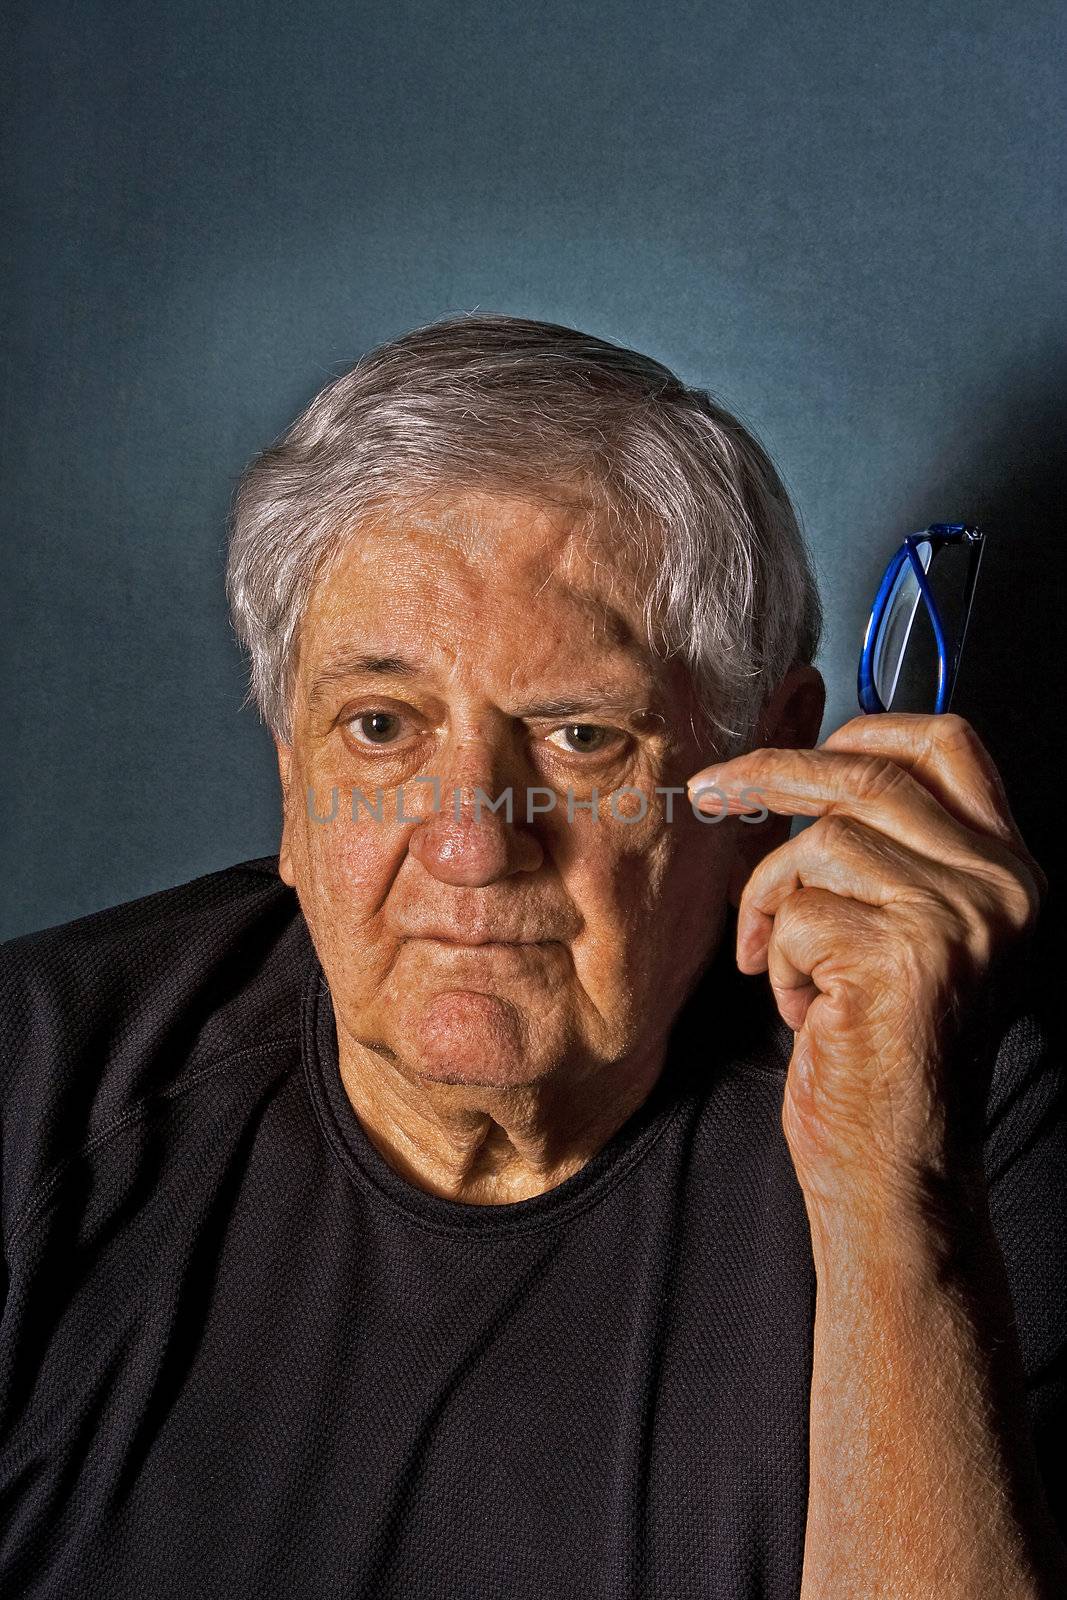 Dramatic side portrait of a senior man with a pair of glasses in his hand next to his face wearing a black shirt isolated on gray/blue